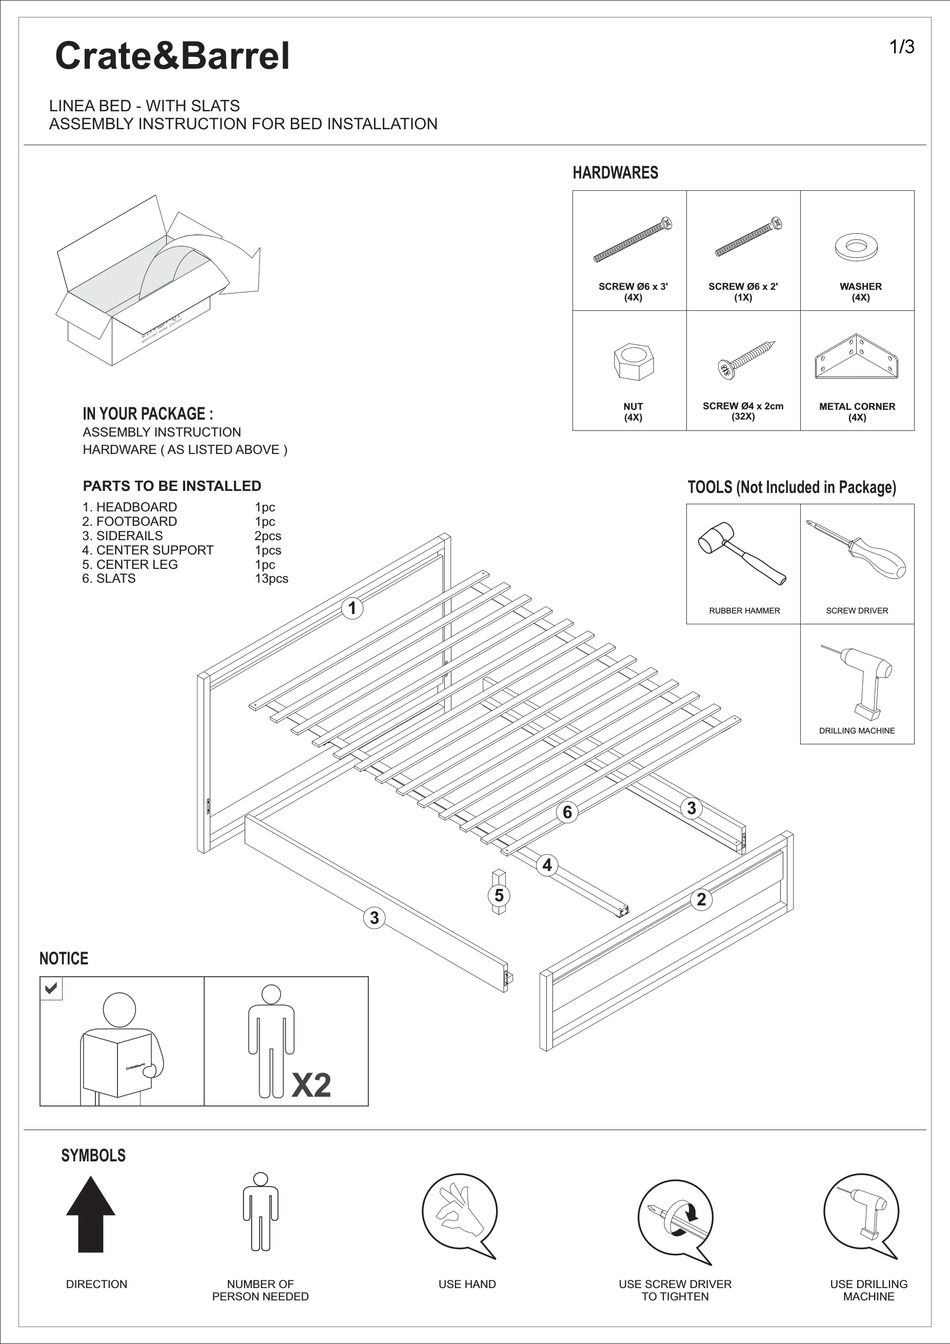 Crate Barrel Linea Bed With Slats, Crate And Barrel Bed Frame Instructions